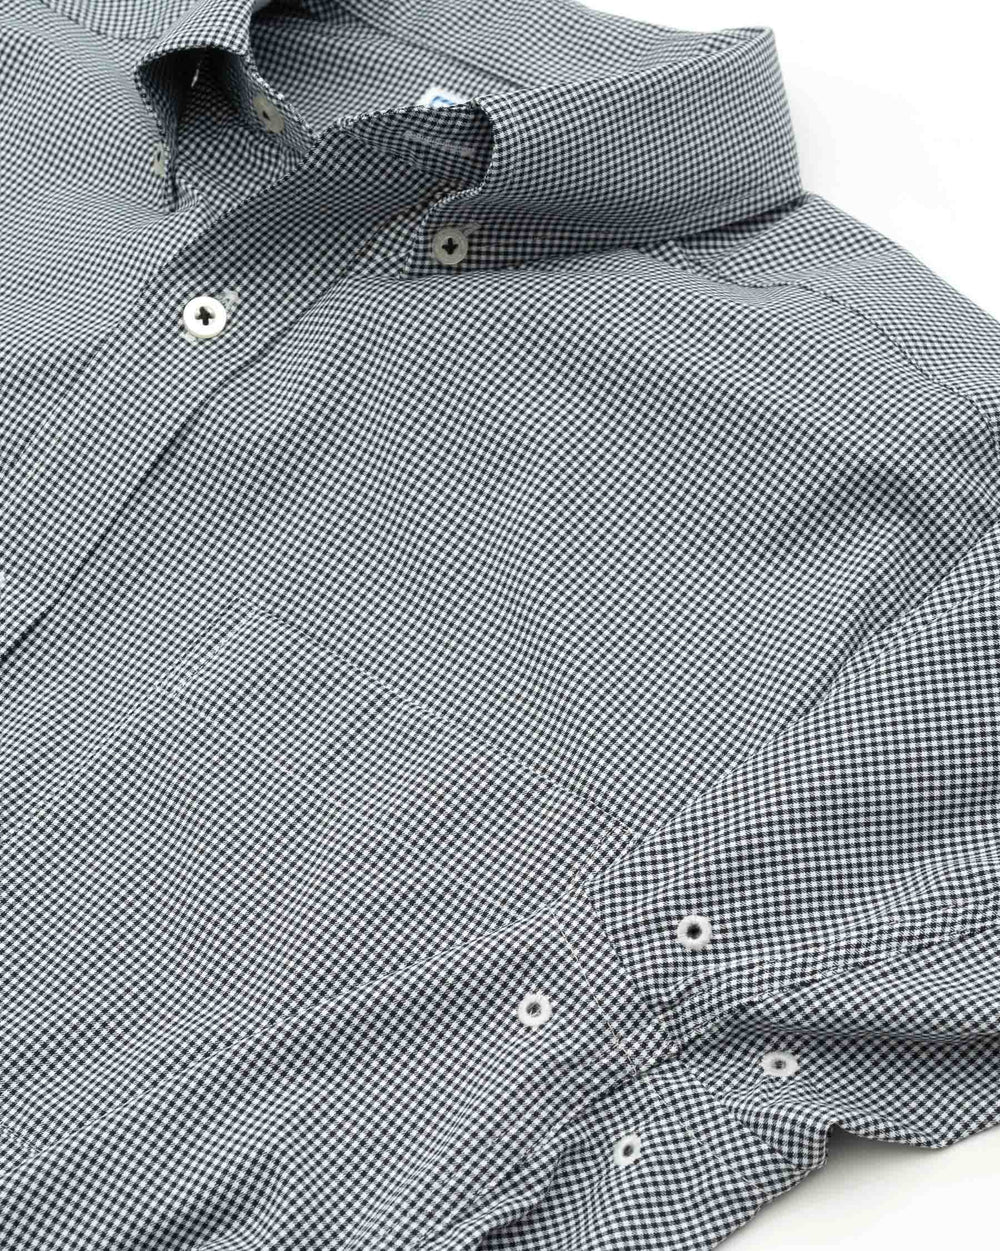 Arm vents of the Men's Black Wake Forest Gingham Button Down Shirt by Southern Tide - Black